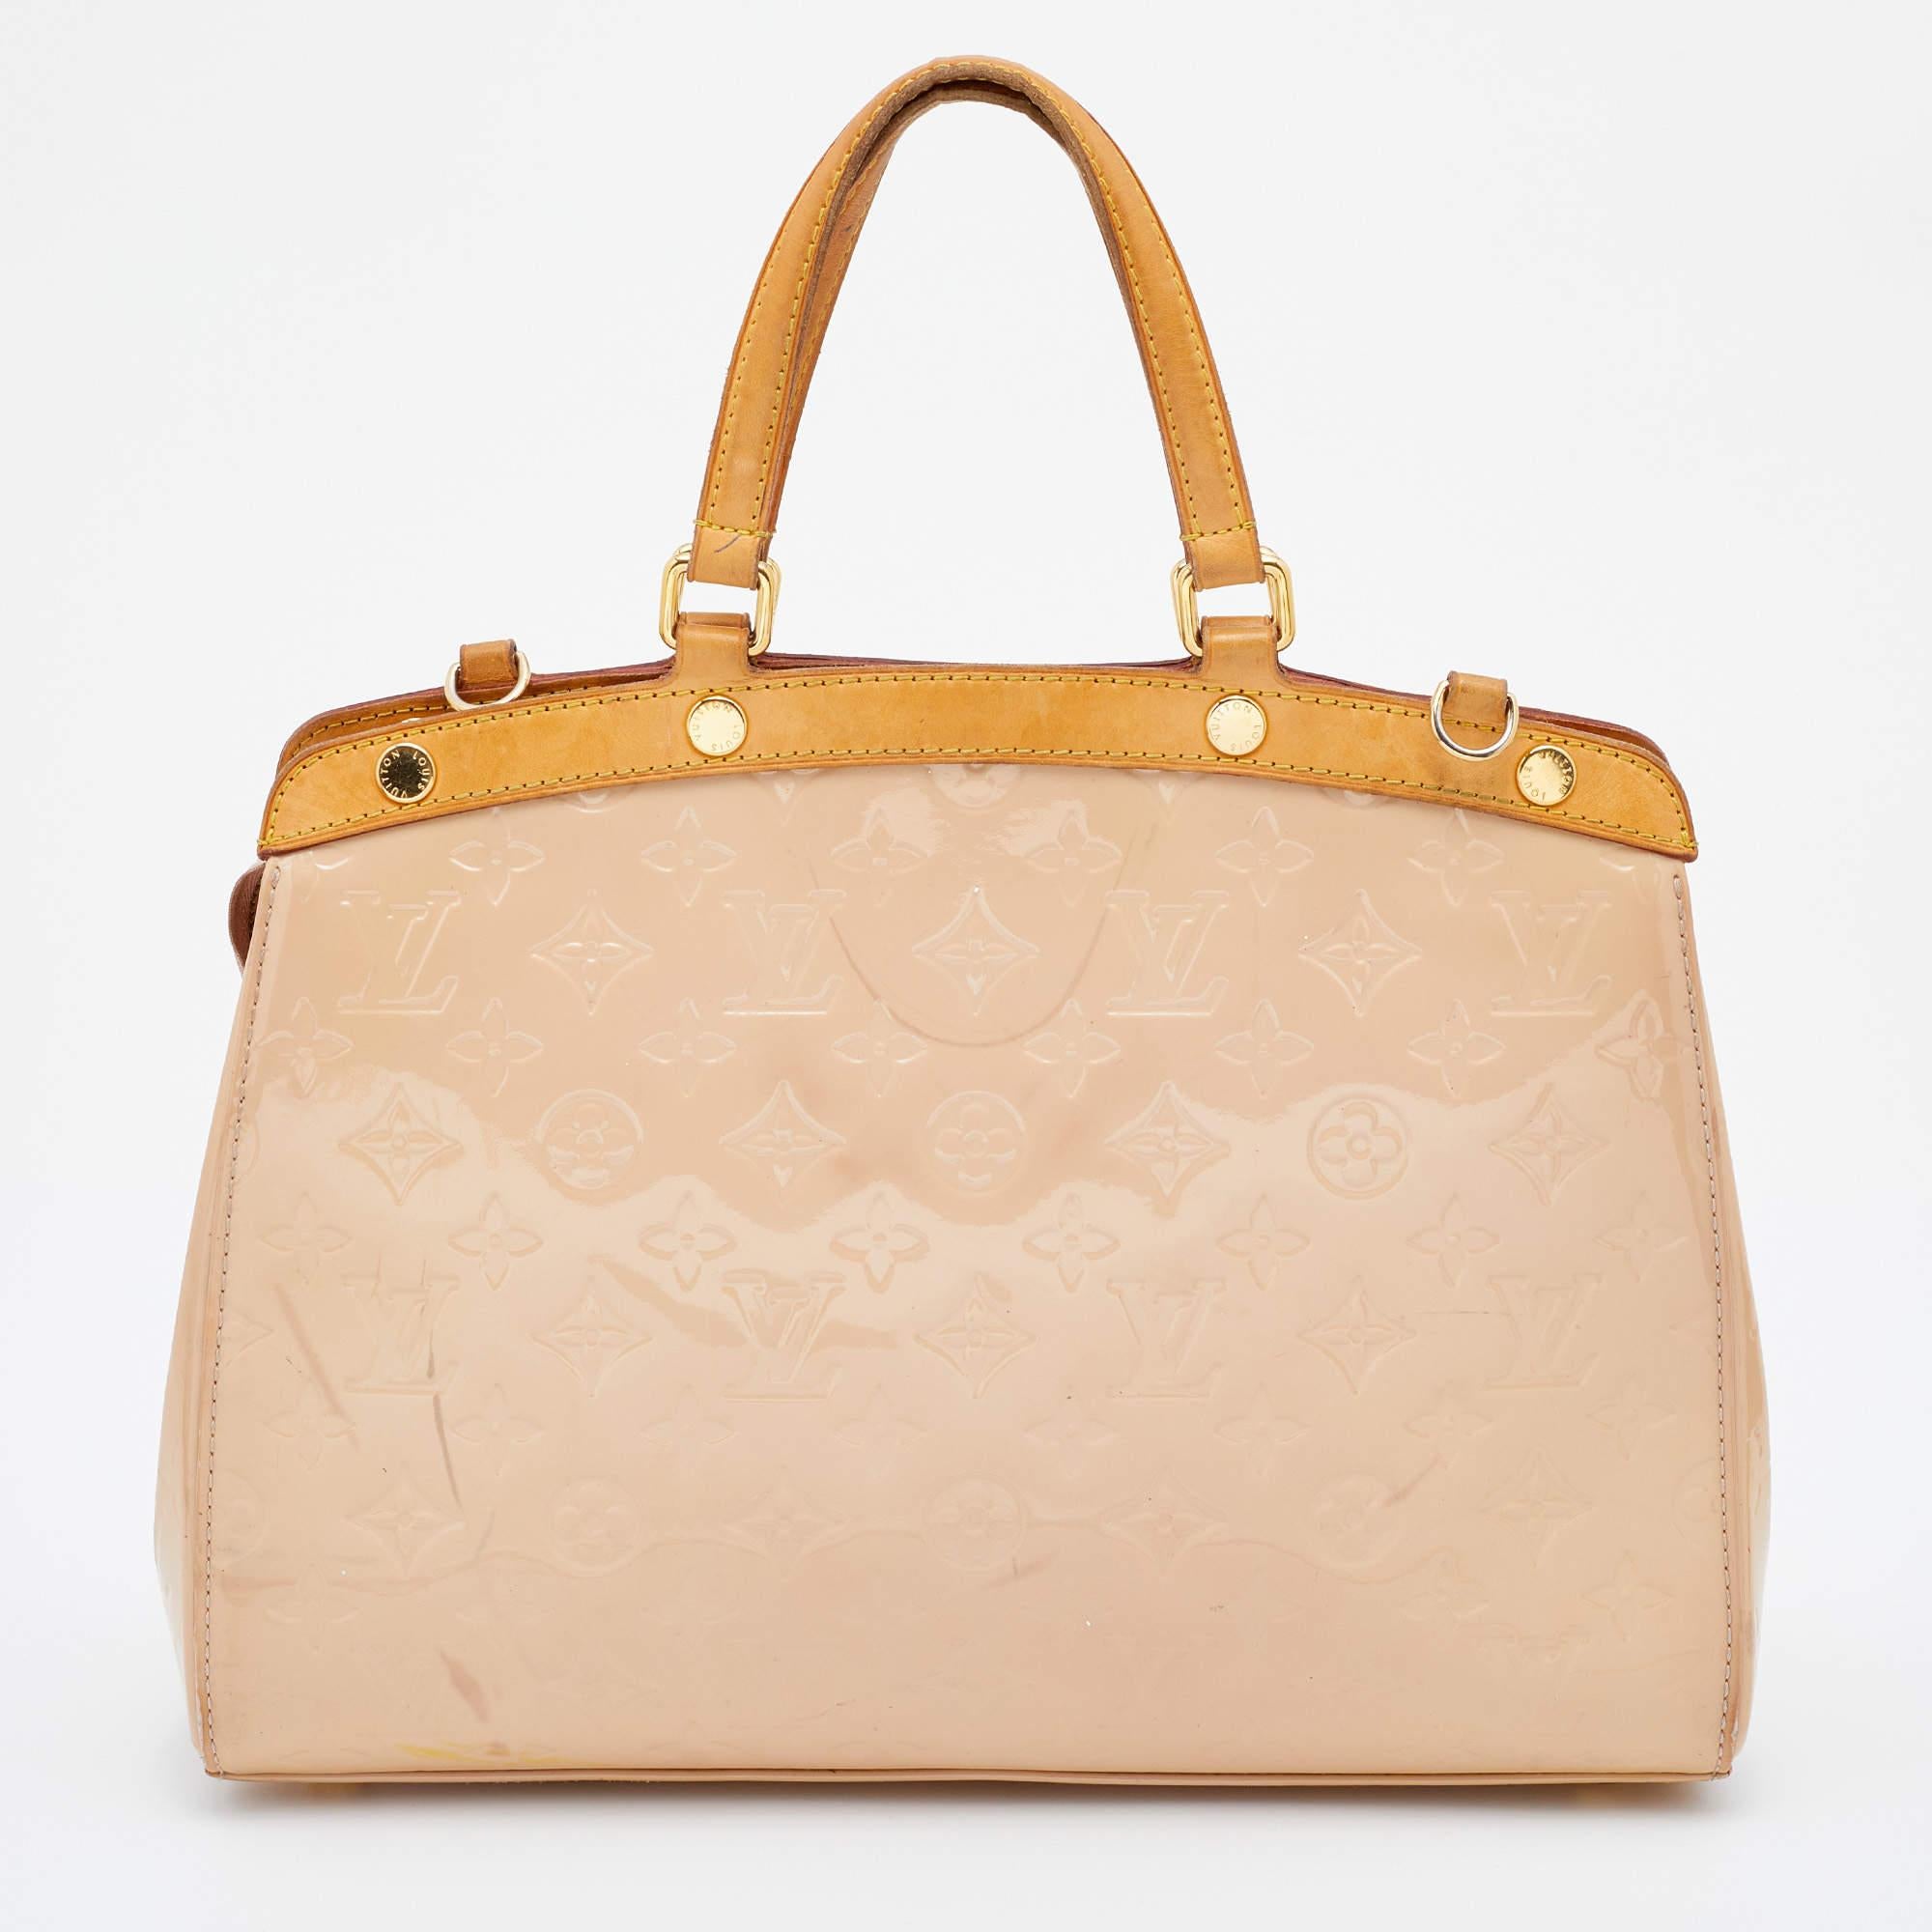 The feminine shape of Louis Vuitton's Brea is inspired by the doctor's bag. Crafted from Monogram Vernis leather, the bag has a fine finish. The fabric interior is spacious, and it is secured by a zipper. The bag features double handles, a shoulder